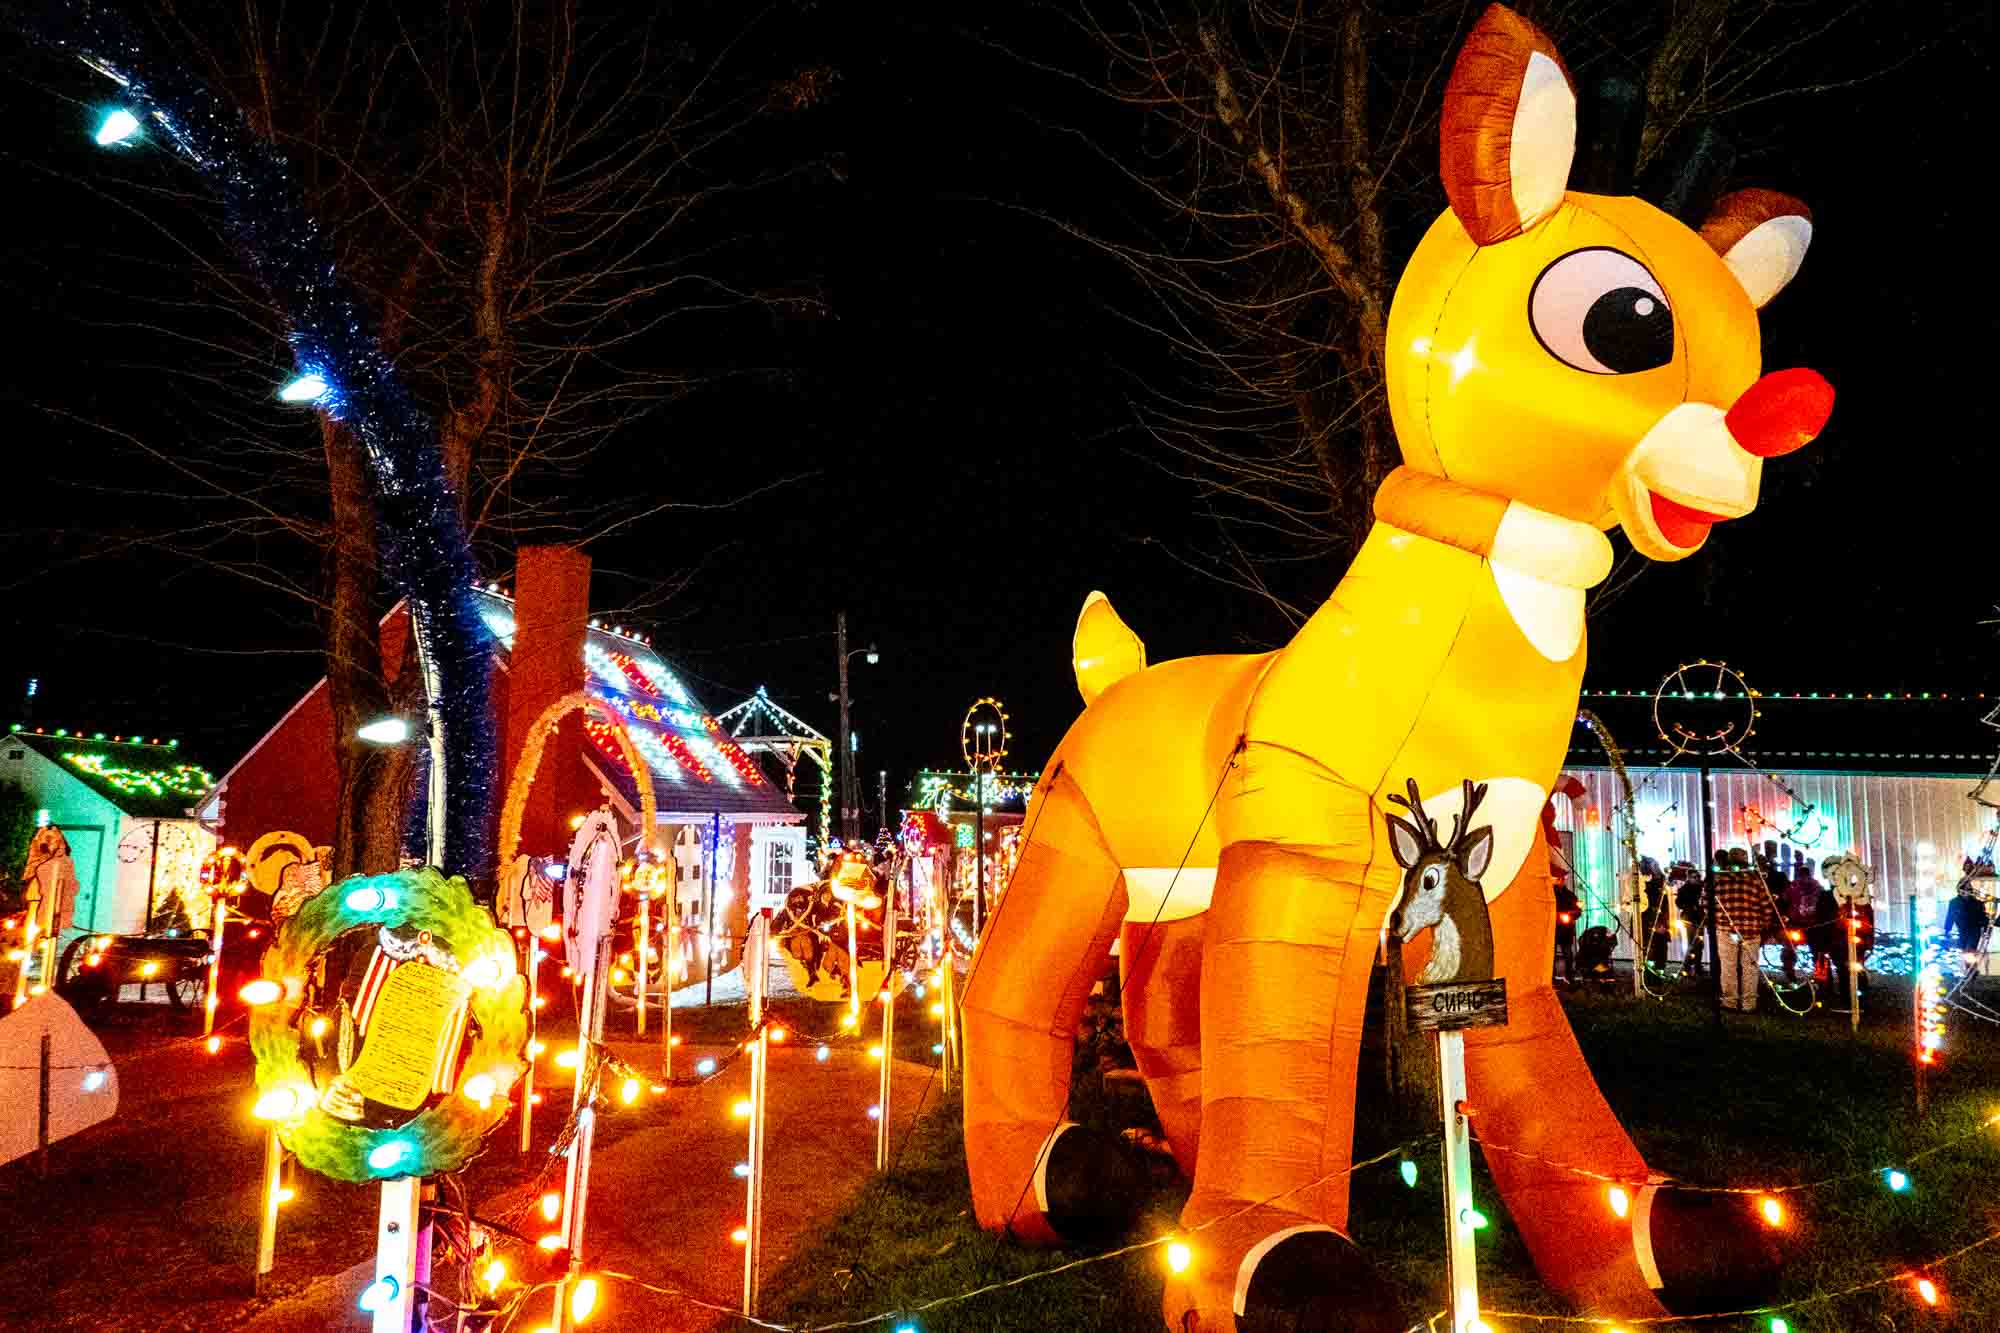 Giant inflatable Rudolph the Red Nosed Reindeer at a Christmas Display